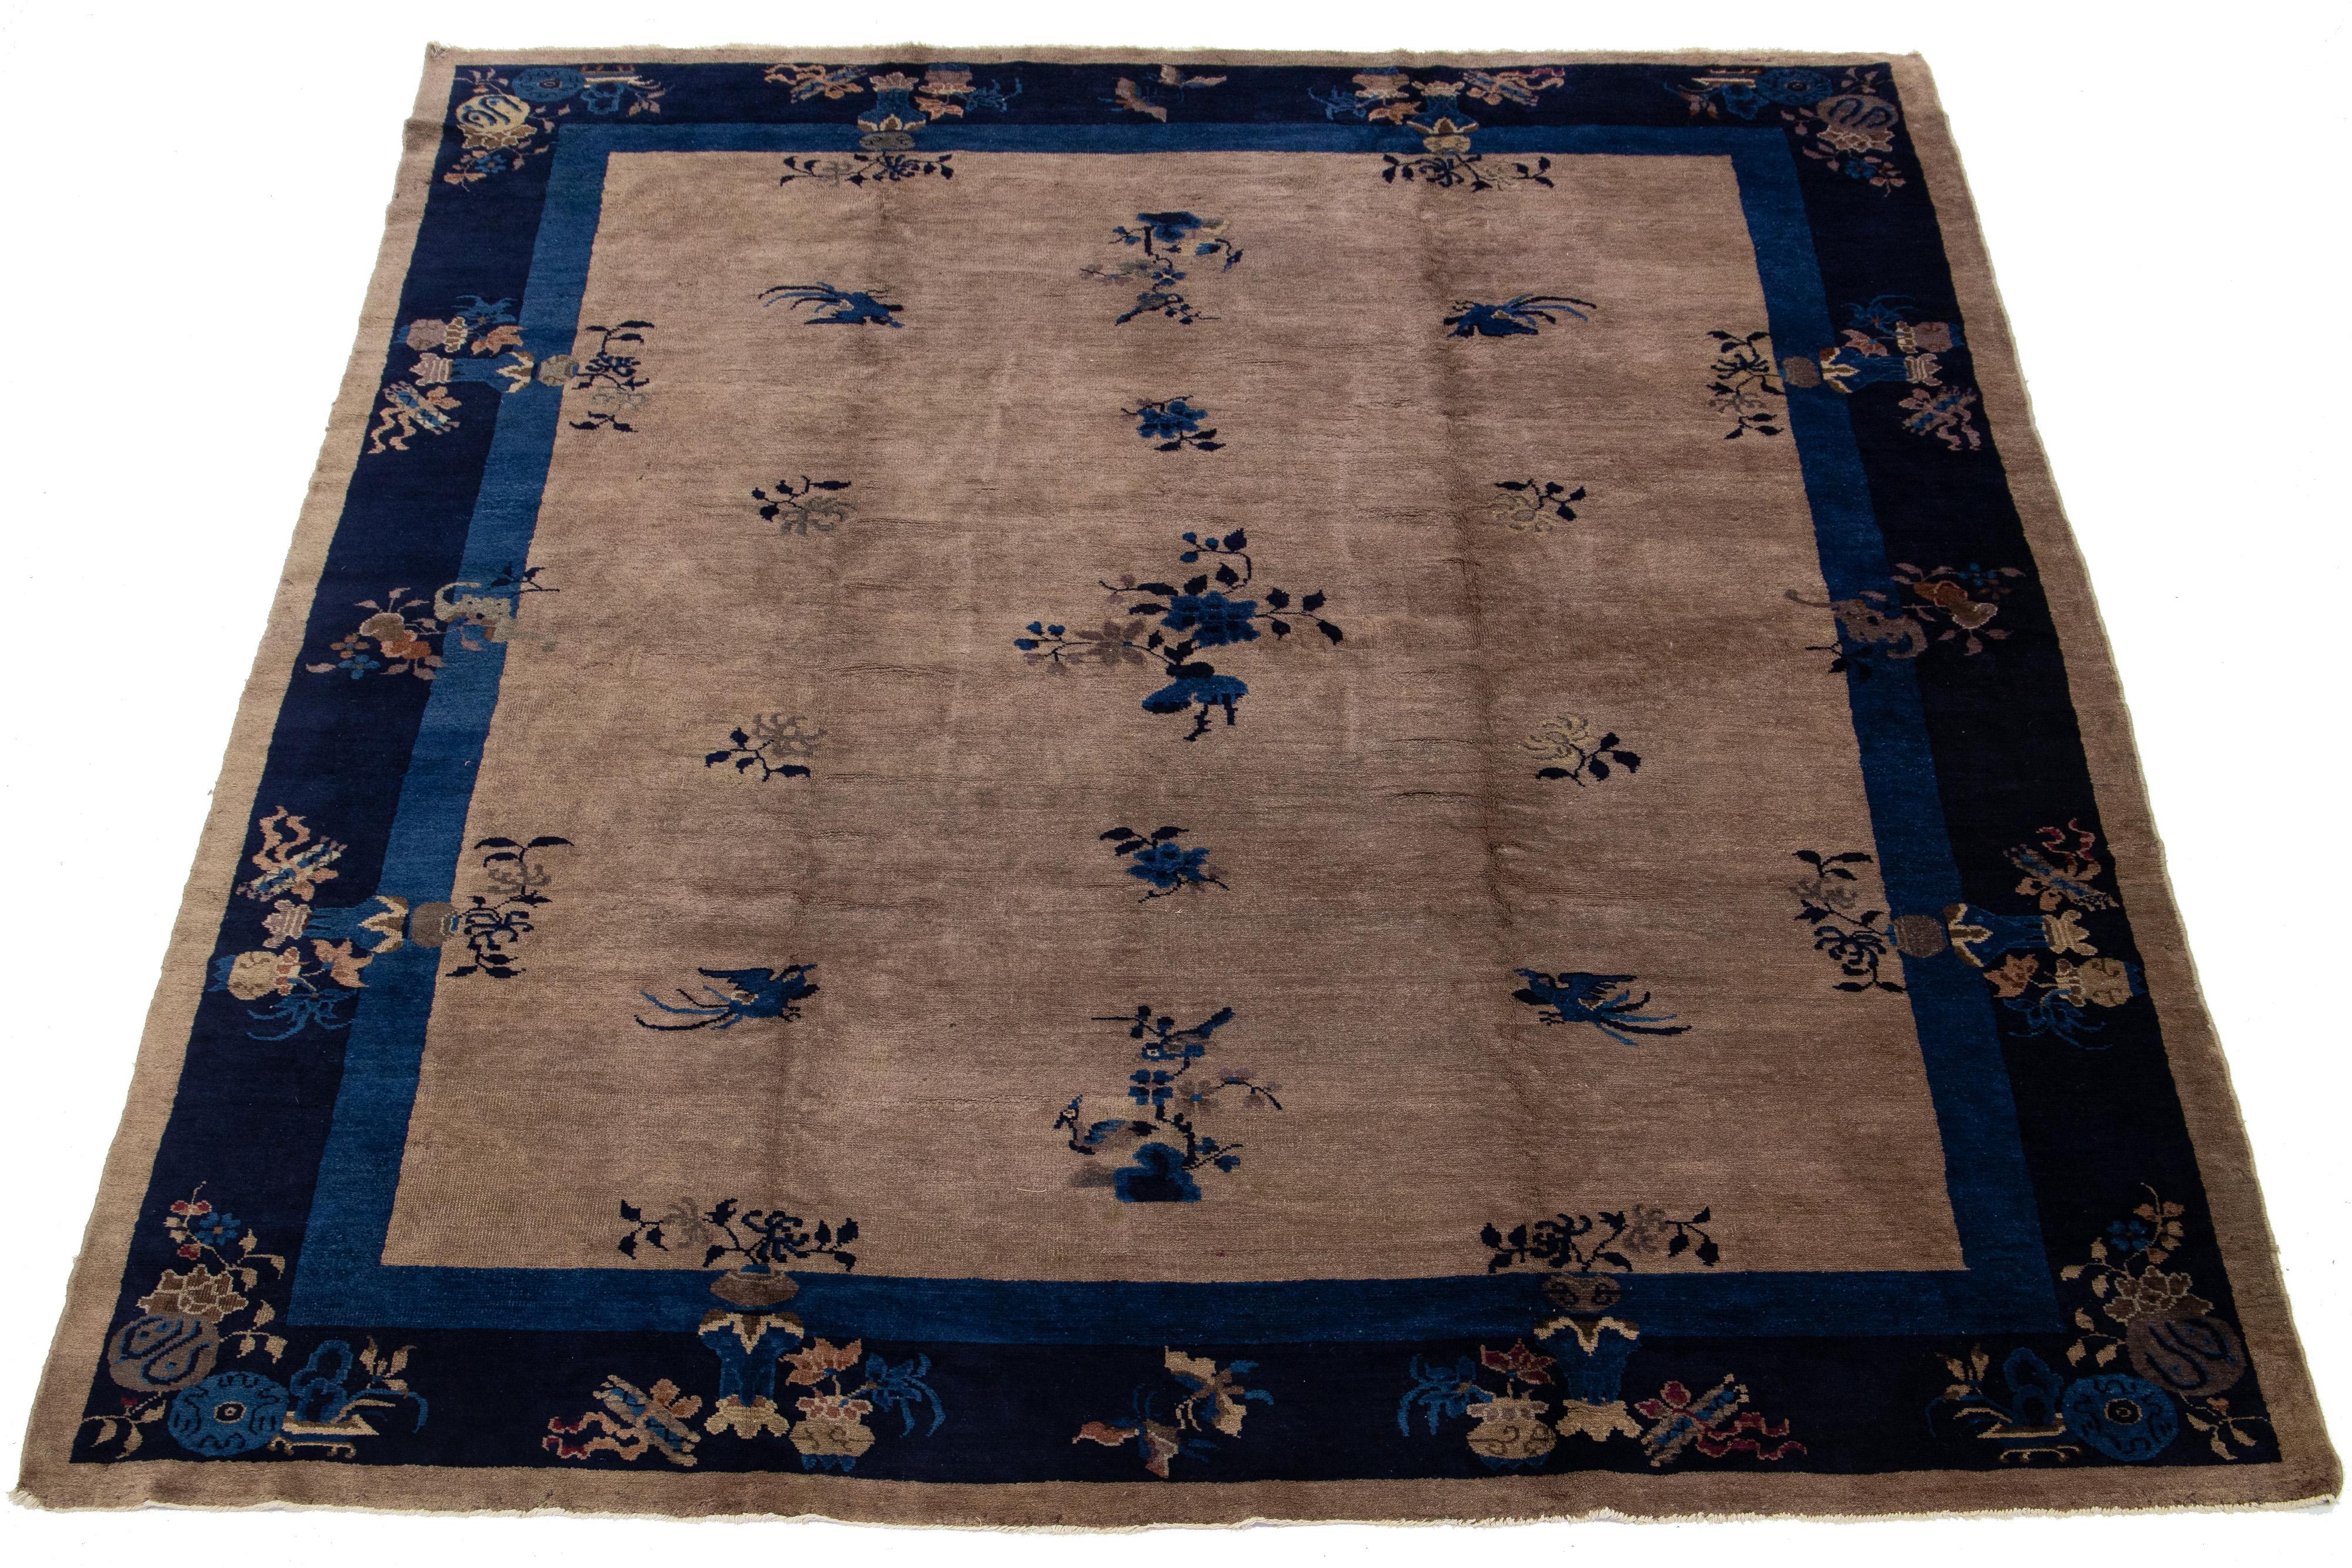 This hand-knotted wool Antique Chinese Art Deco rug features a floral design with black hues on a brown background and a navy blue frame.


This rug measures 8' x 9'7